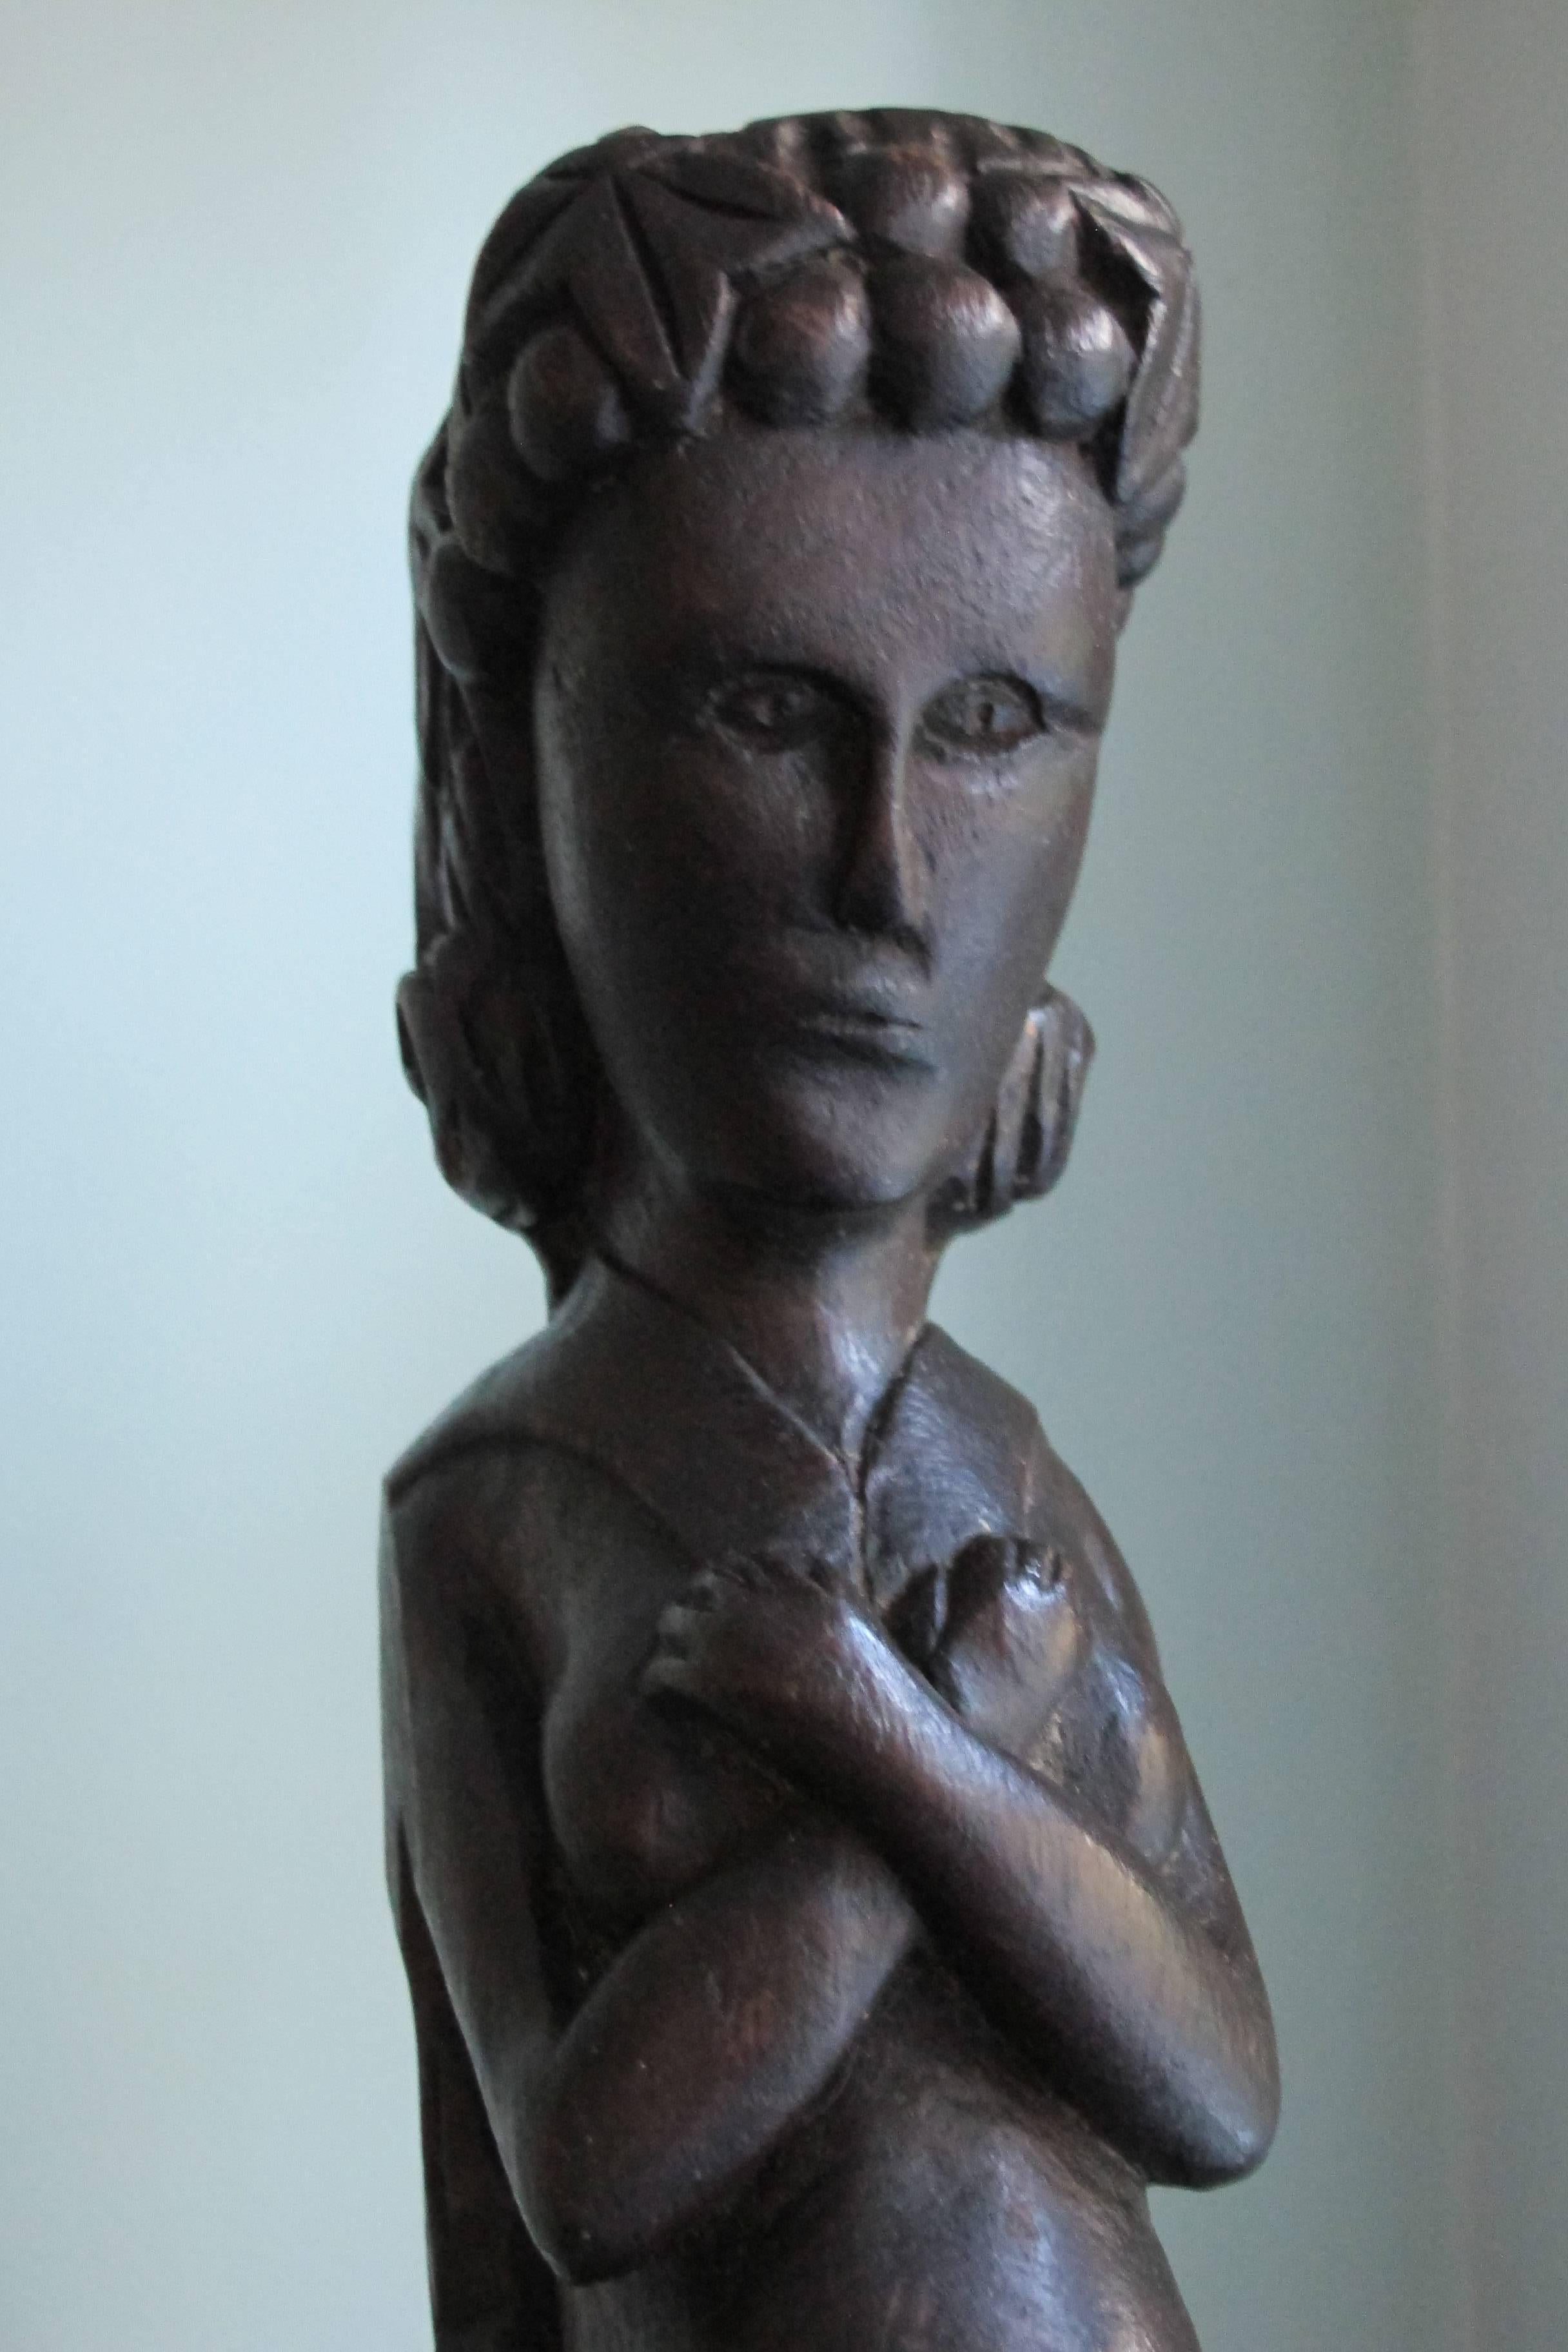 Carving that may have been architectural or from a piece of fanciful furniture. The arresting female figure has her arms crossed over her chest with a downward gaze.
The carving has a deep brown stain and smooth surface.